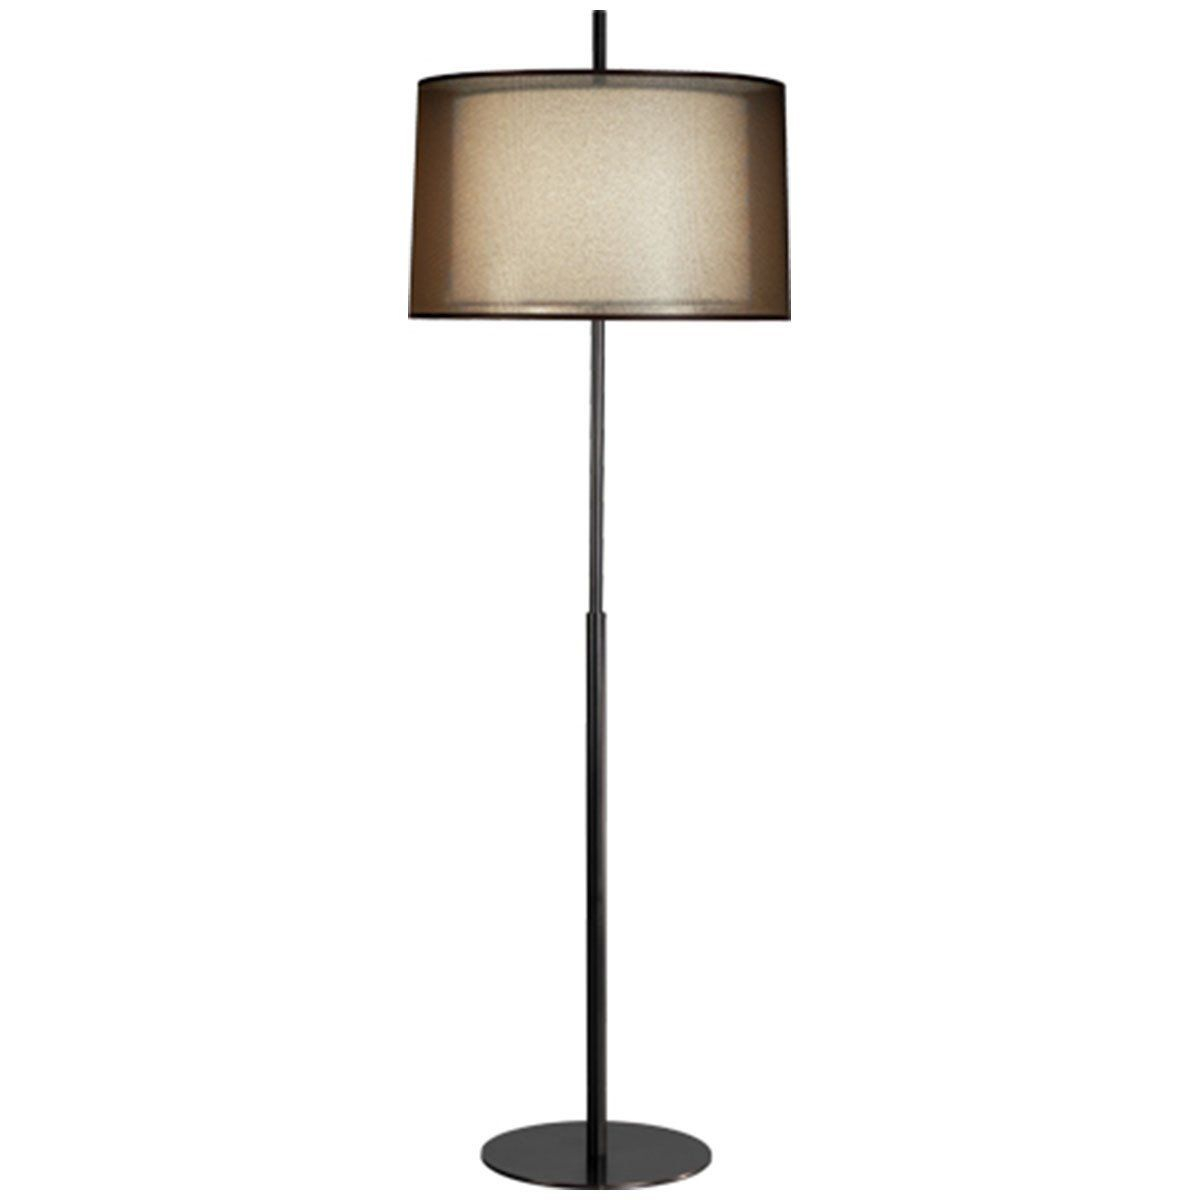 Robert Abbey Saturnia Floor Lamp Products Floor Lamp intended for sizing 1200 X 1200